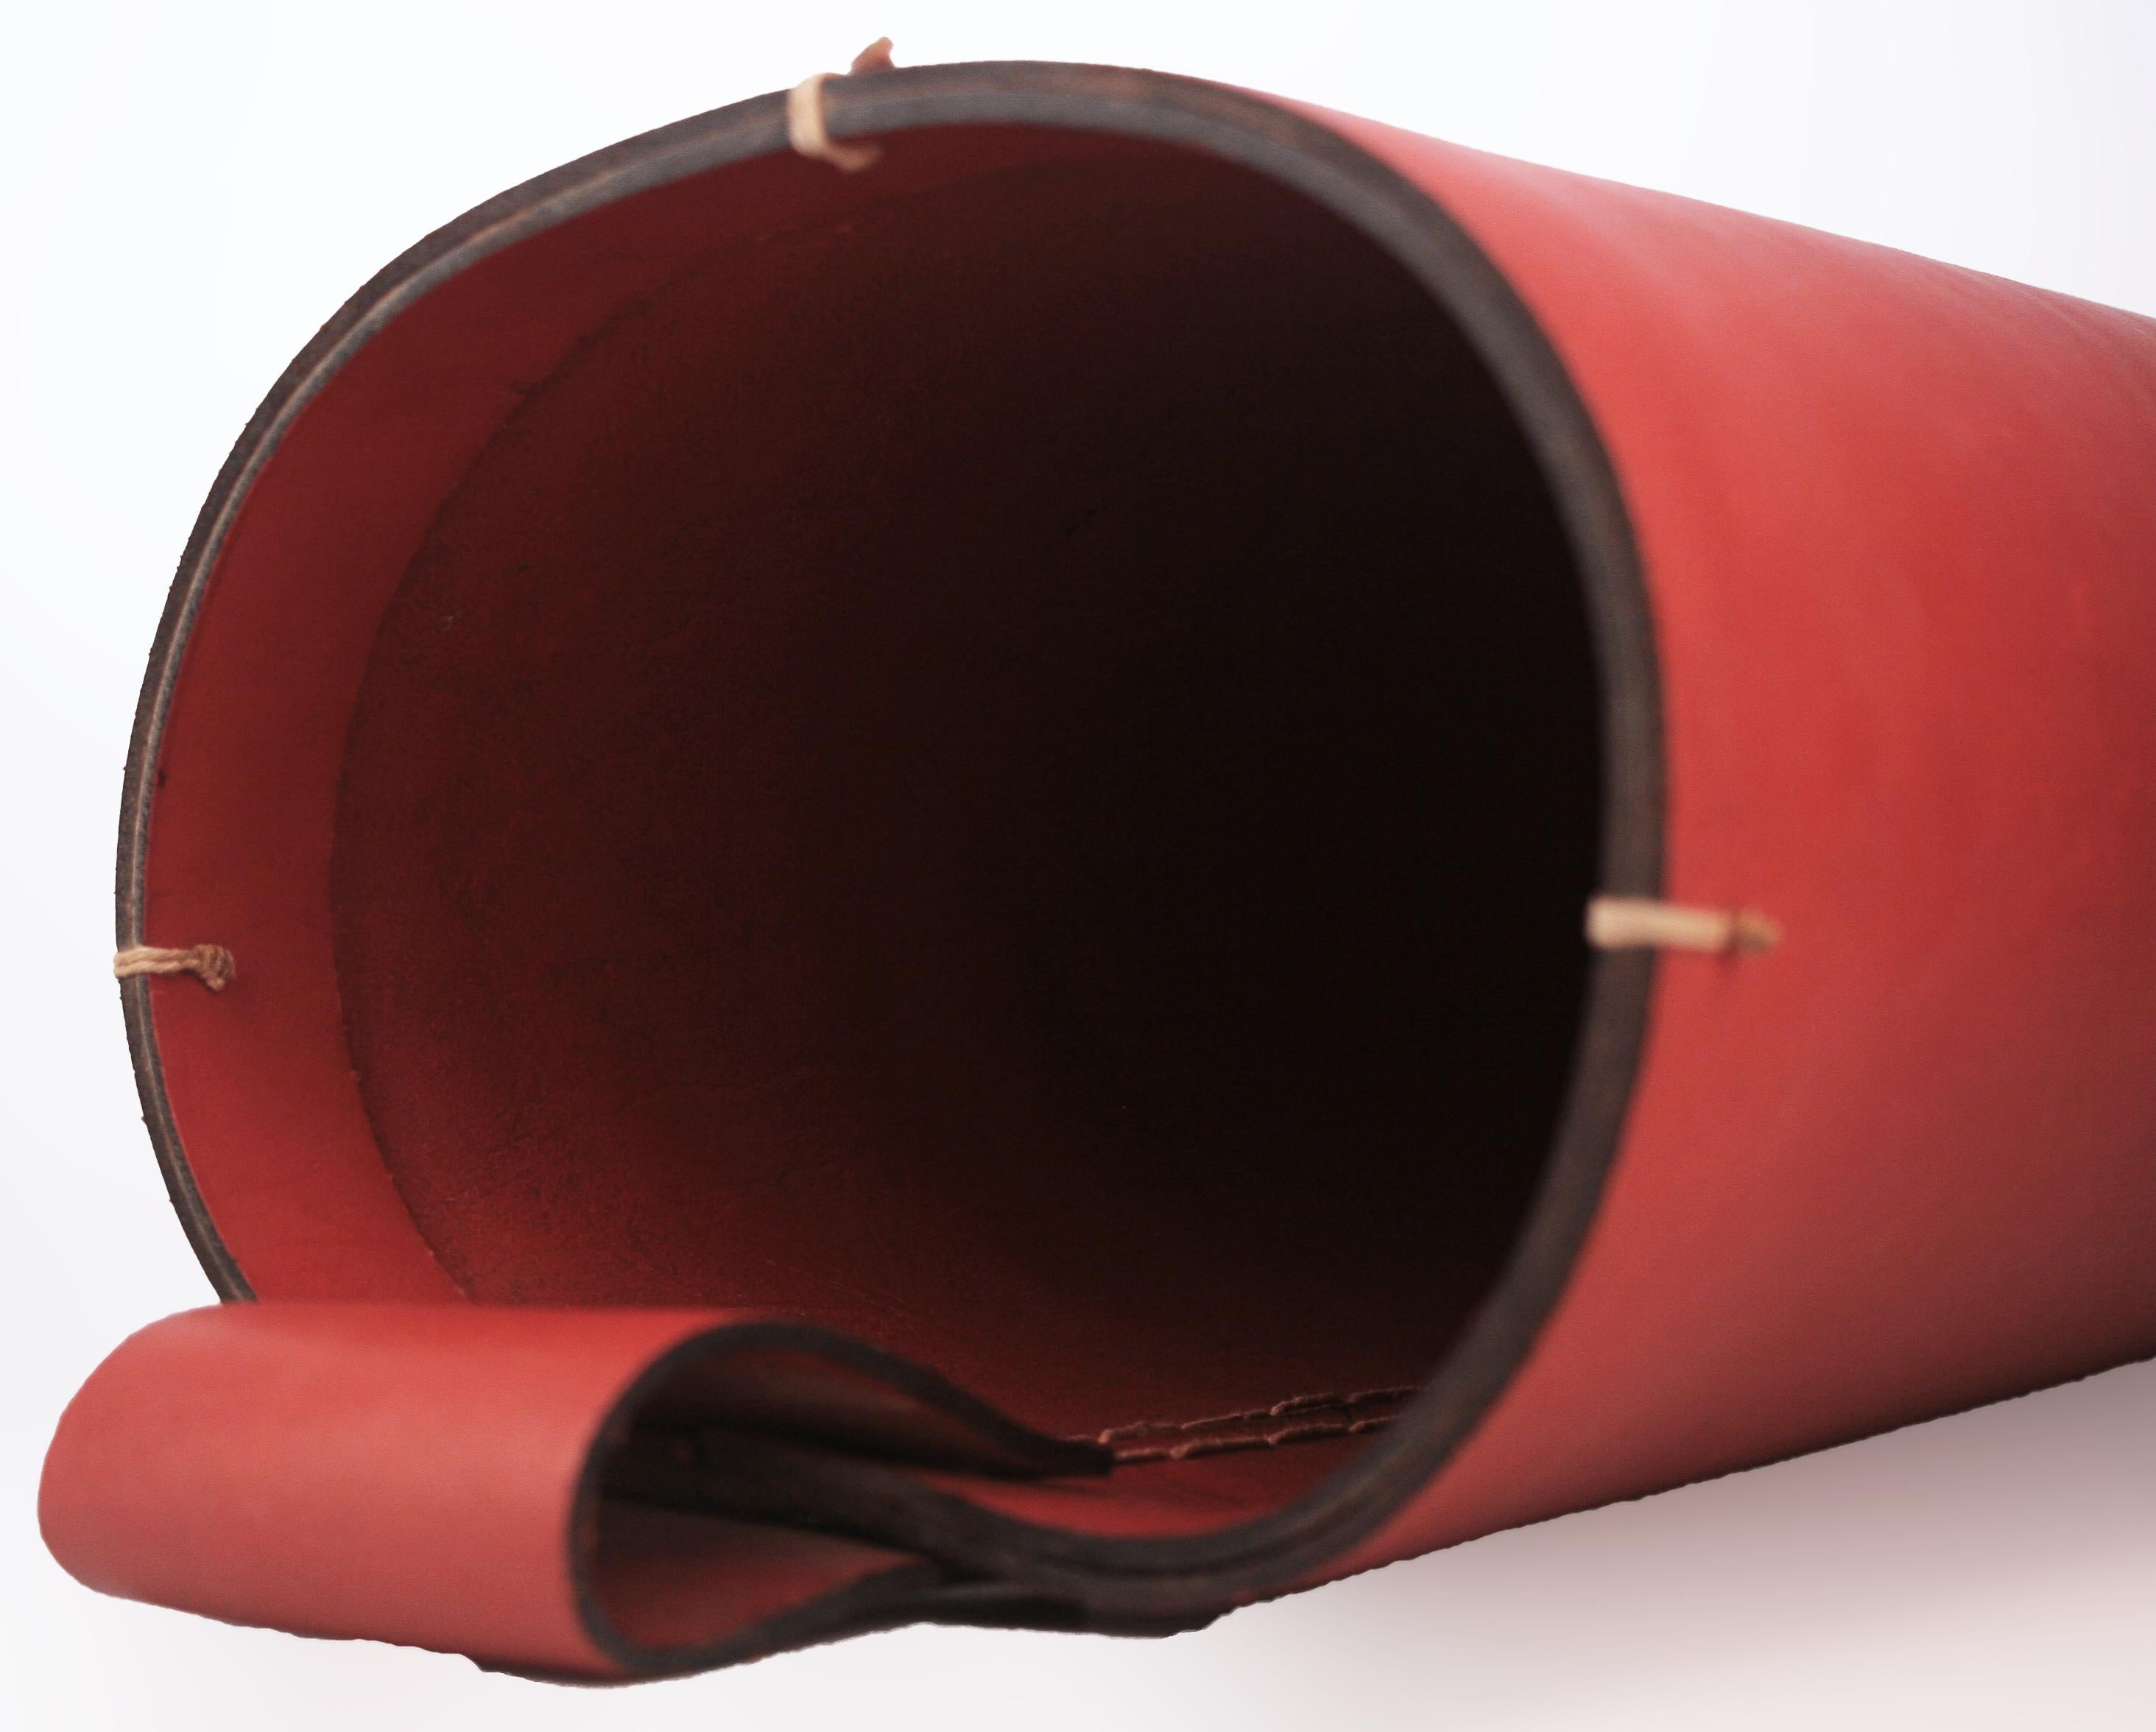 Mid-20th C. Modern French Red Leather Cylindrical Umbrella Stand by Hermès Paris For Sale 5